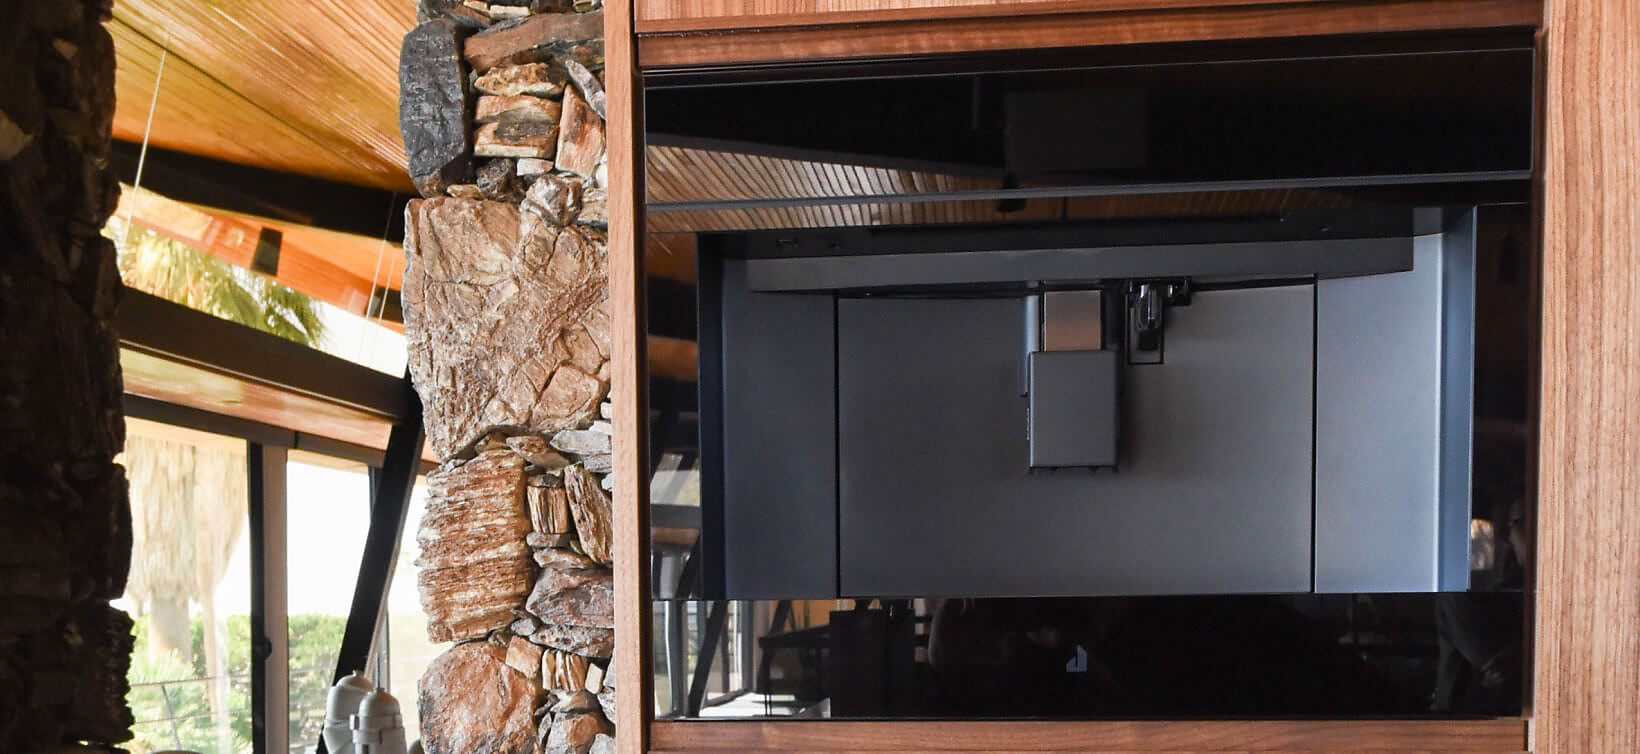 A JennAir Built-In Coffee Machine installed in a rustic, wooden home. 